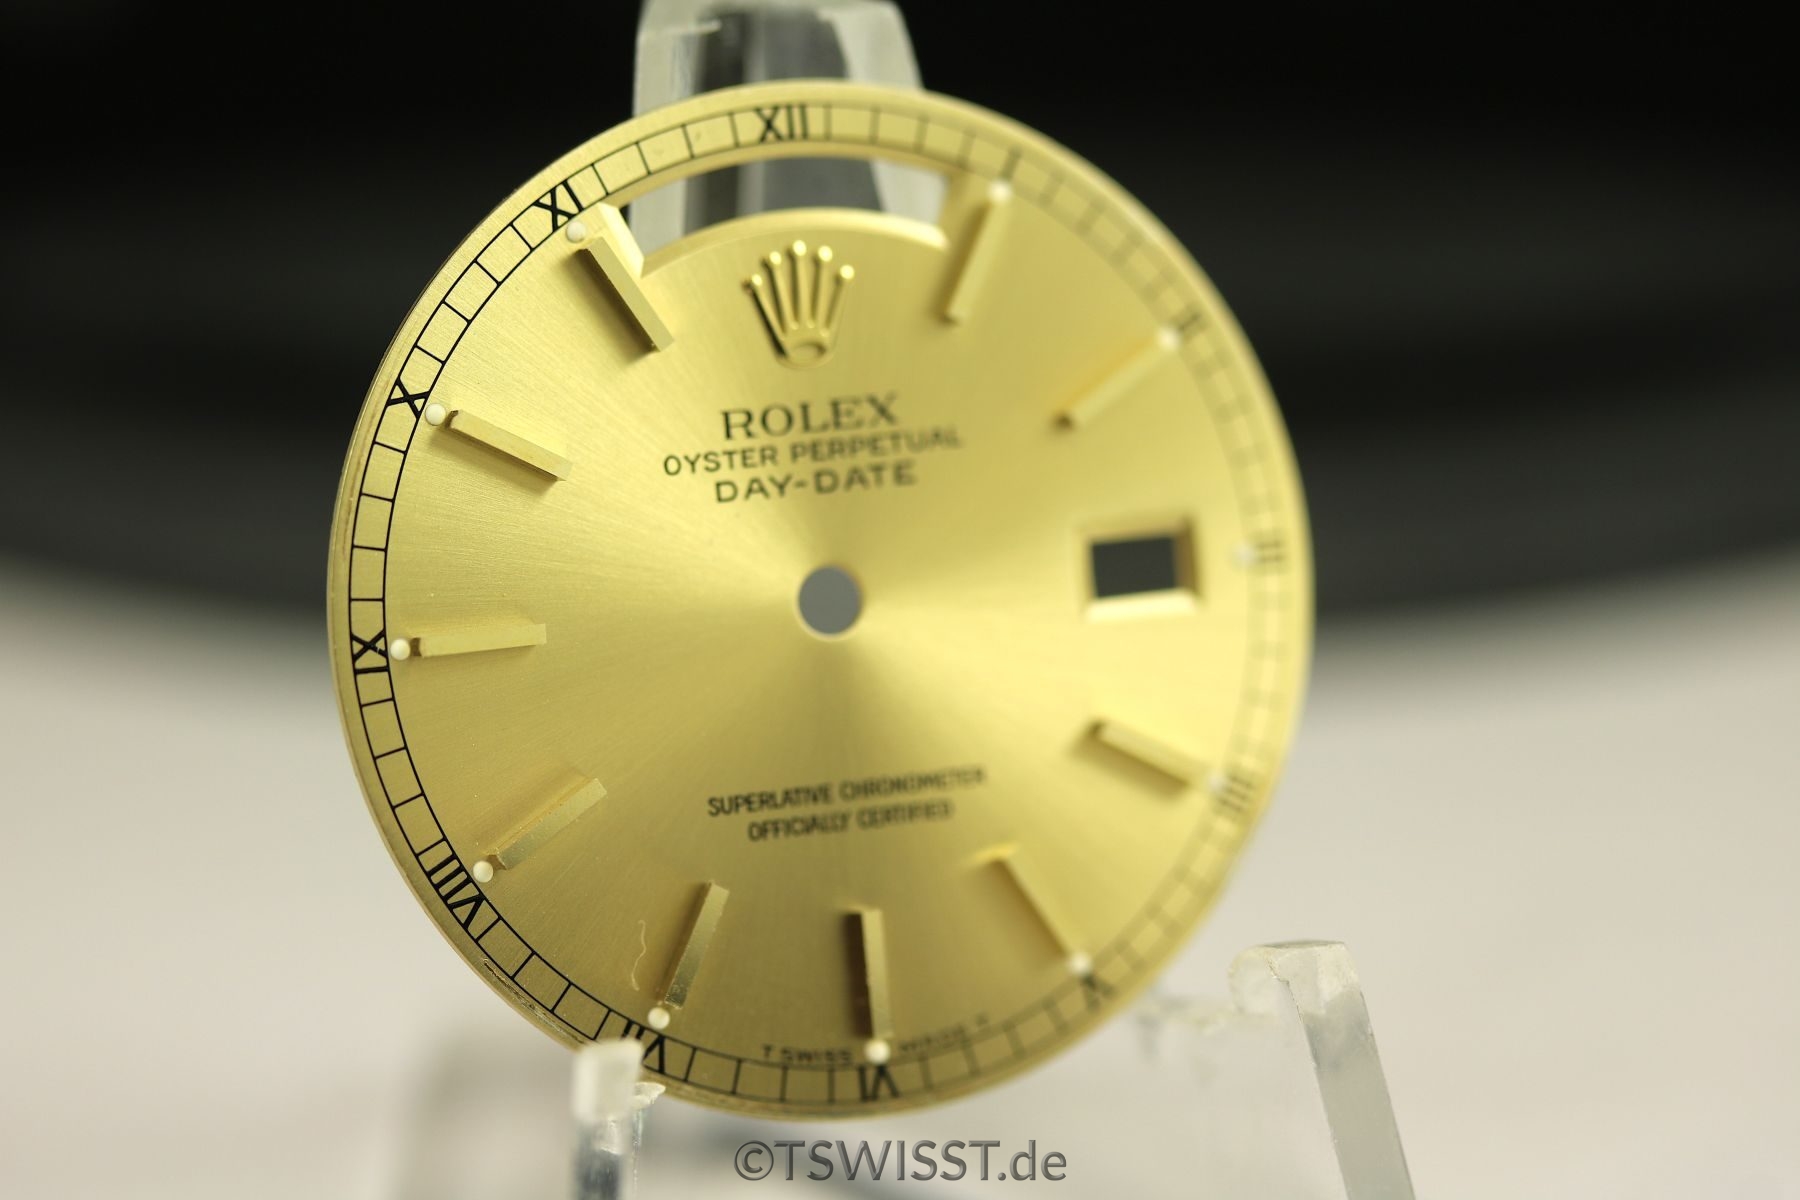 Rolex dial for Day-date